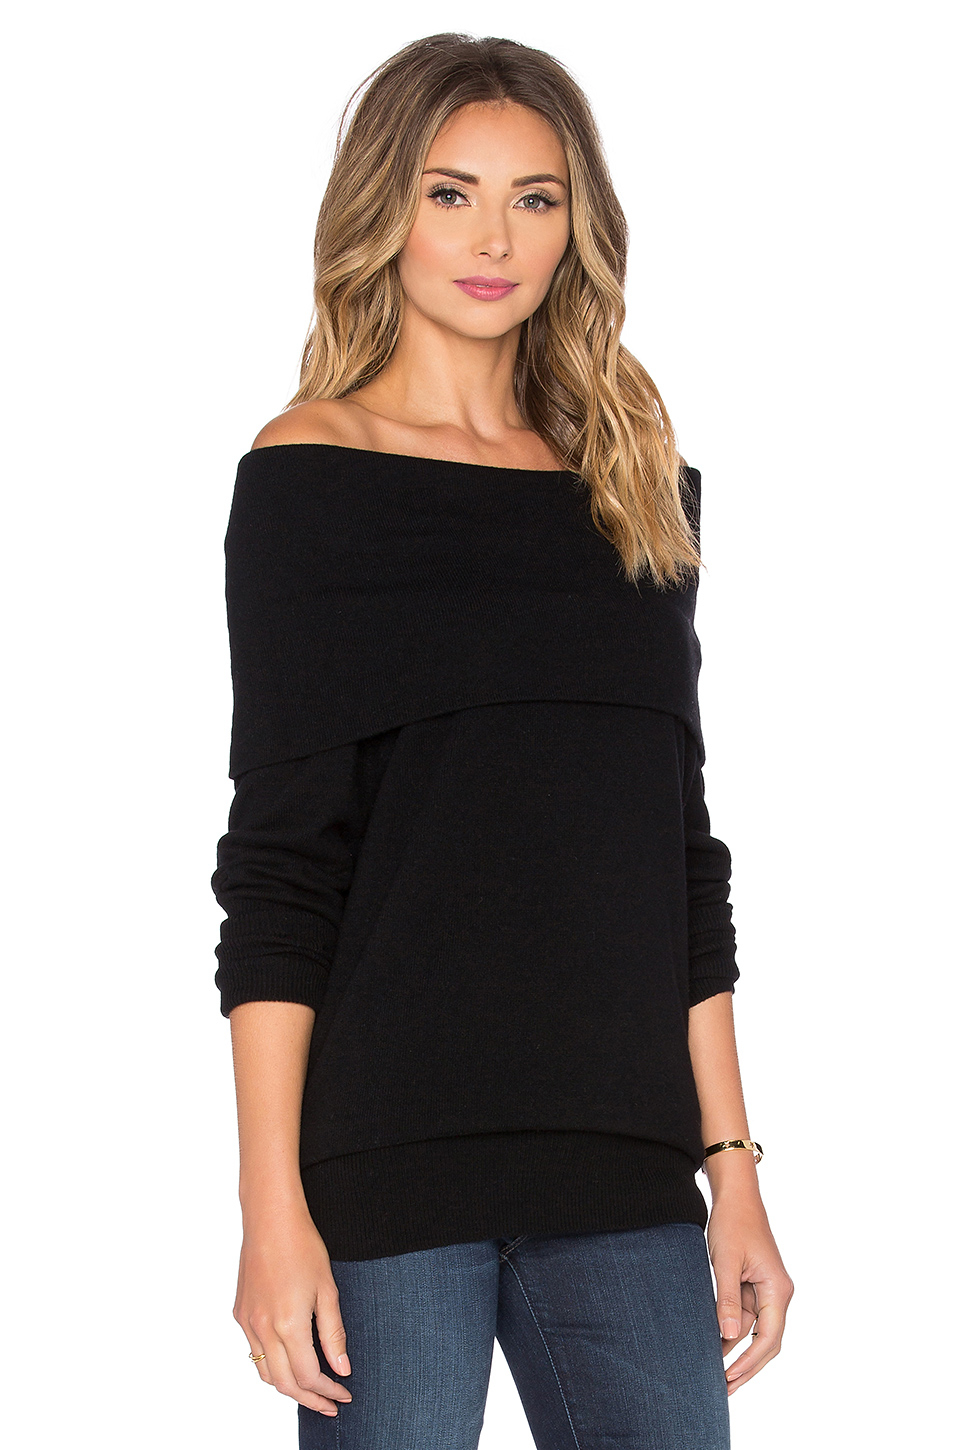 Autumn cashmere Slouchy Off Shoulder Sweater in Black | Lyst